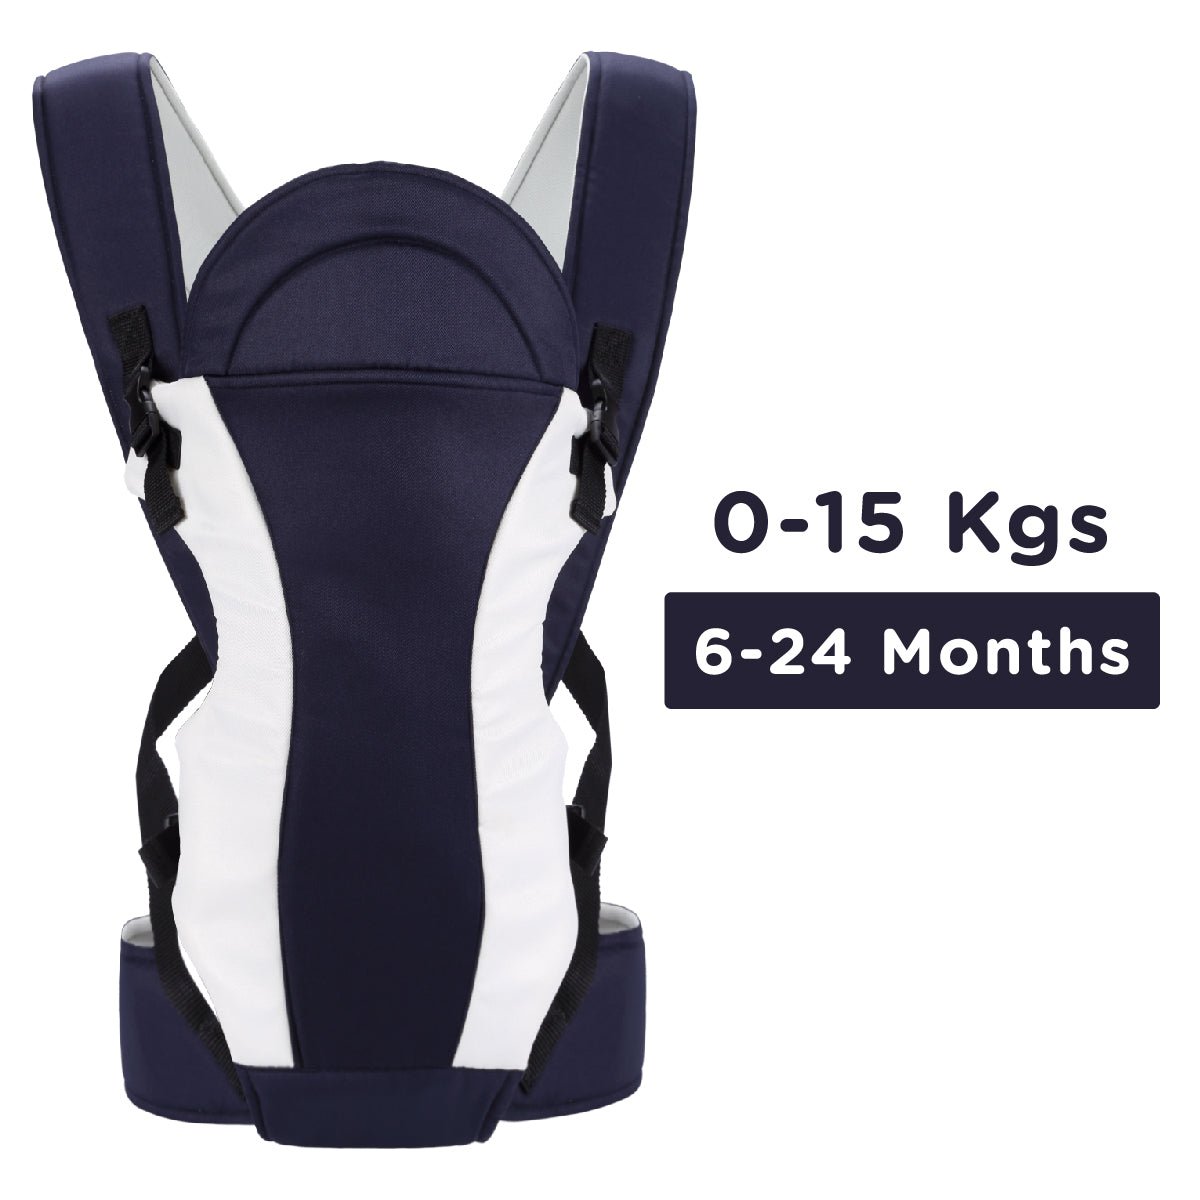 R For Rabbit Chubby Cheeks New Baby Carriers Black - BCCCBL2